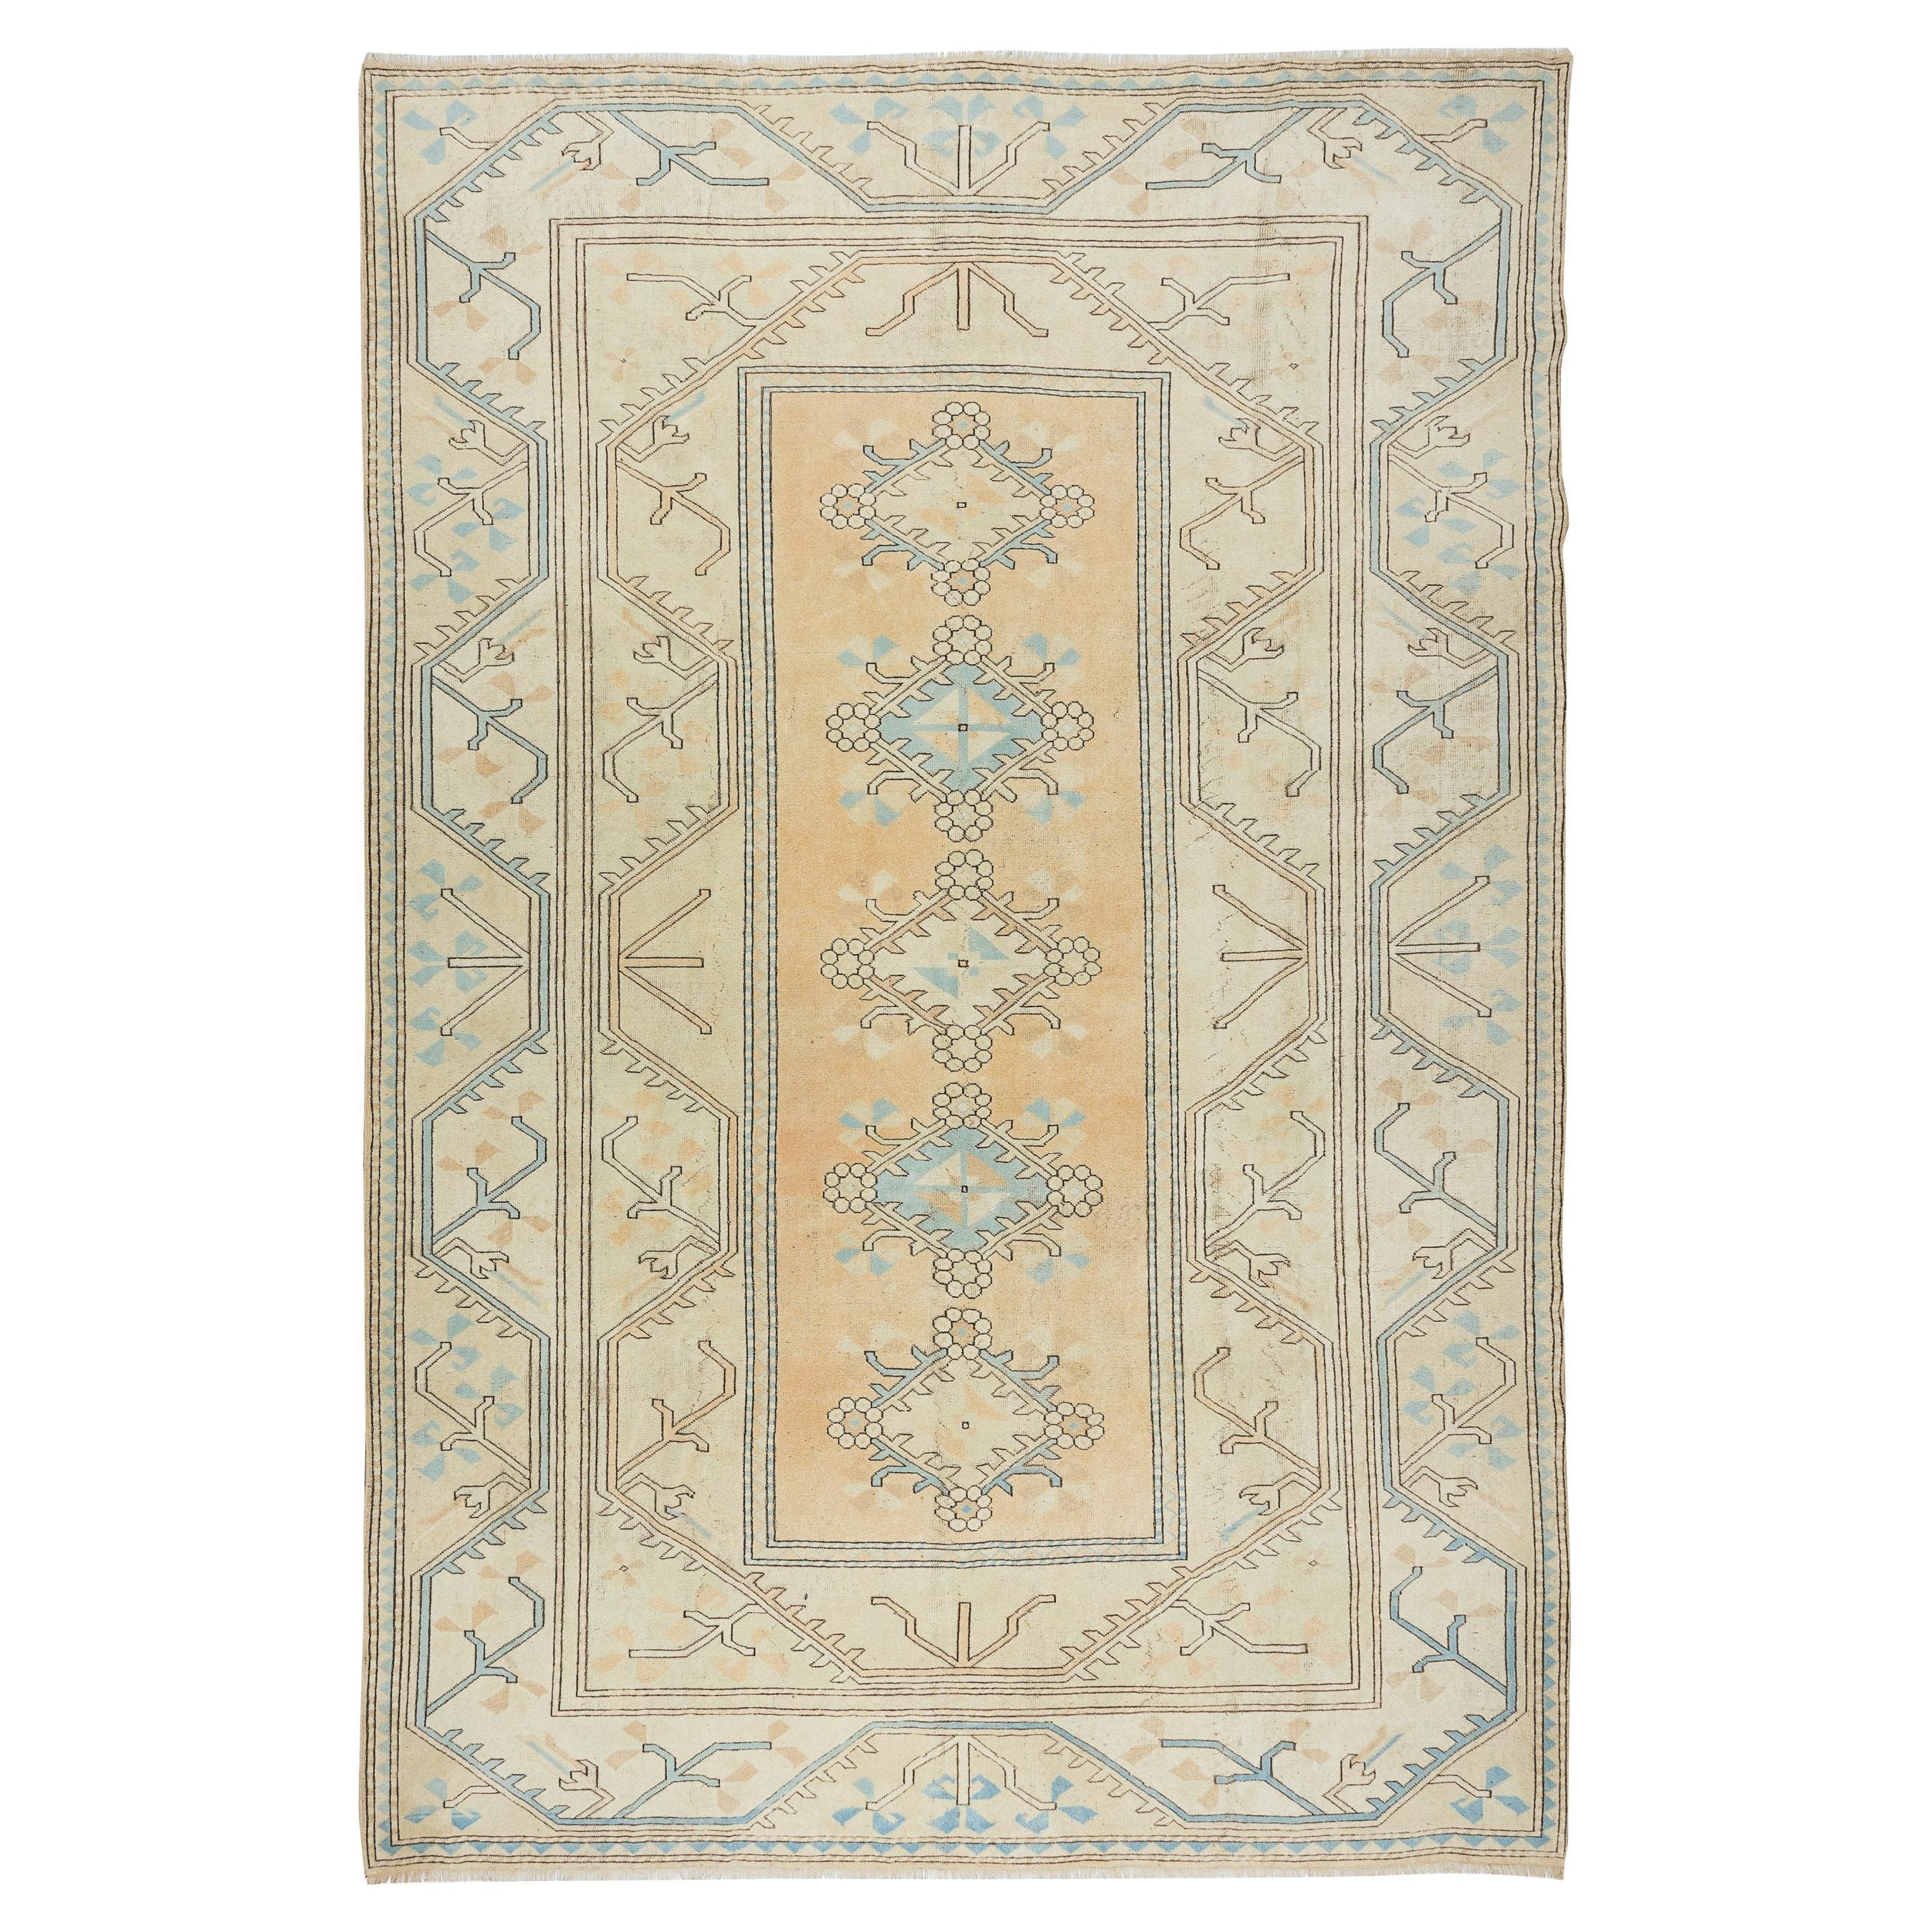 8.4x12 Ft Hand Knotted Vintage Large Wool Rug from Turkey / Milas, 100% Wool For Sale